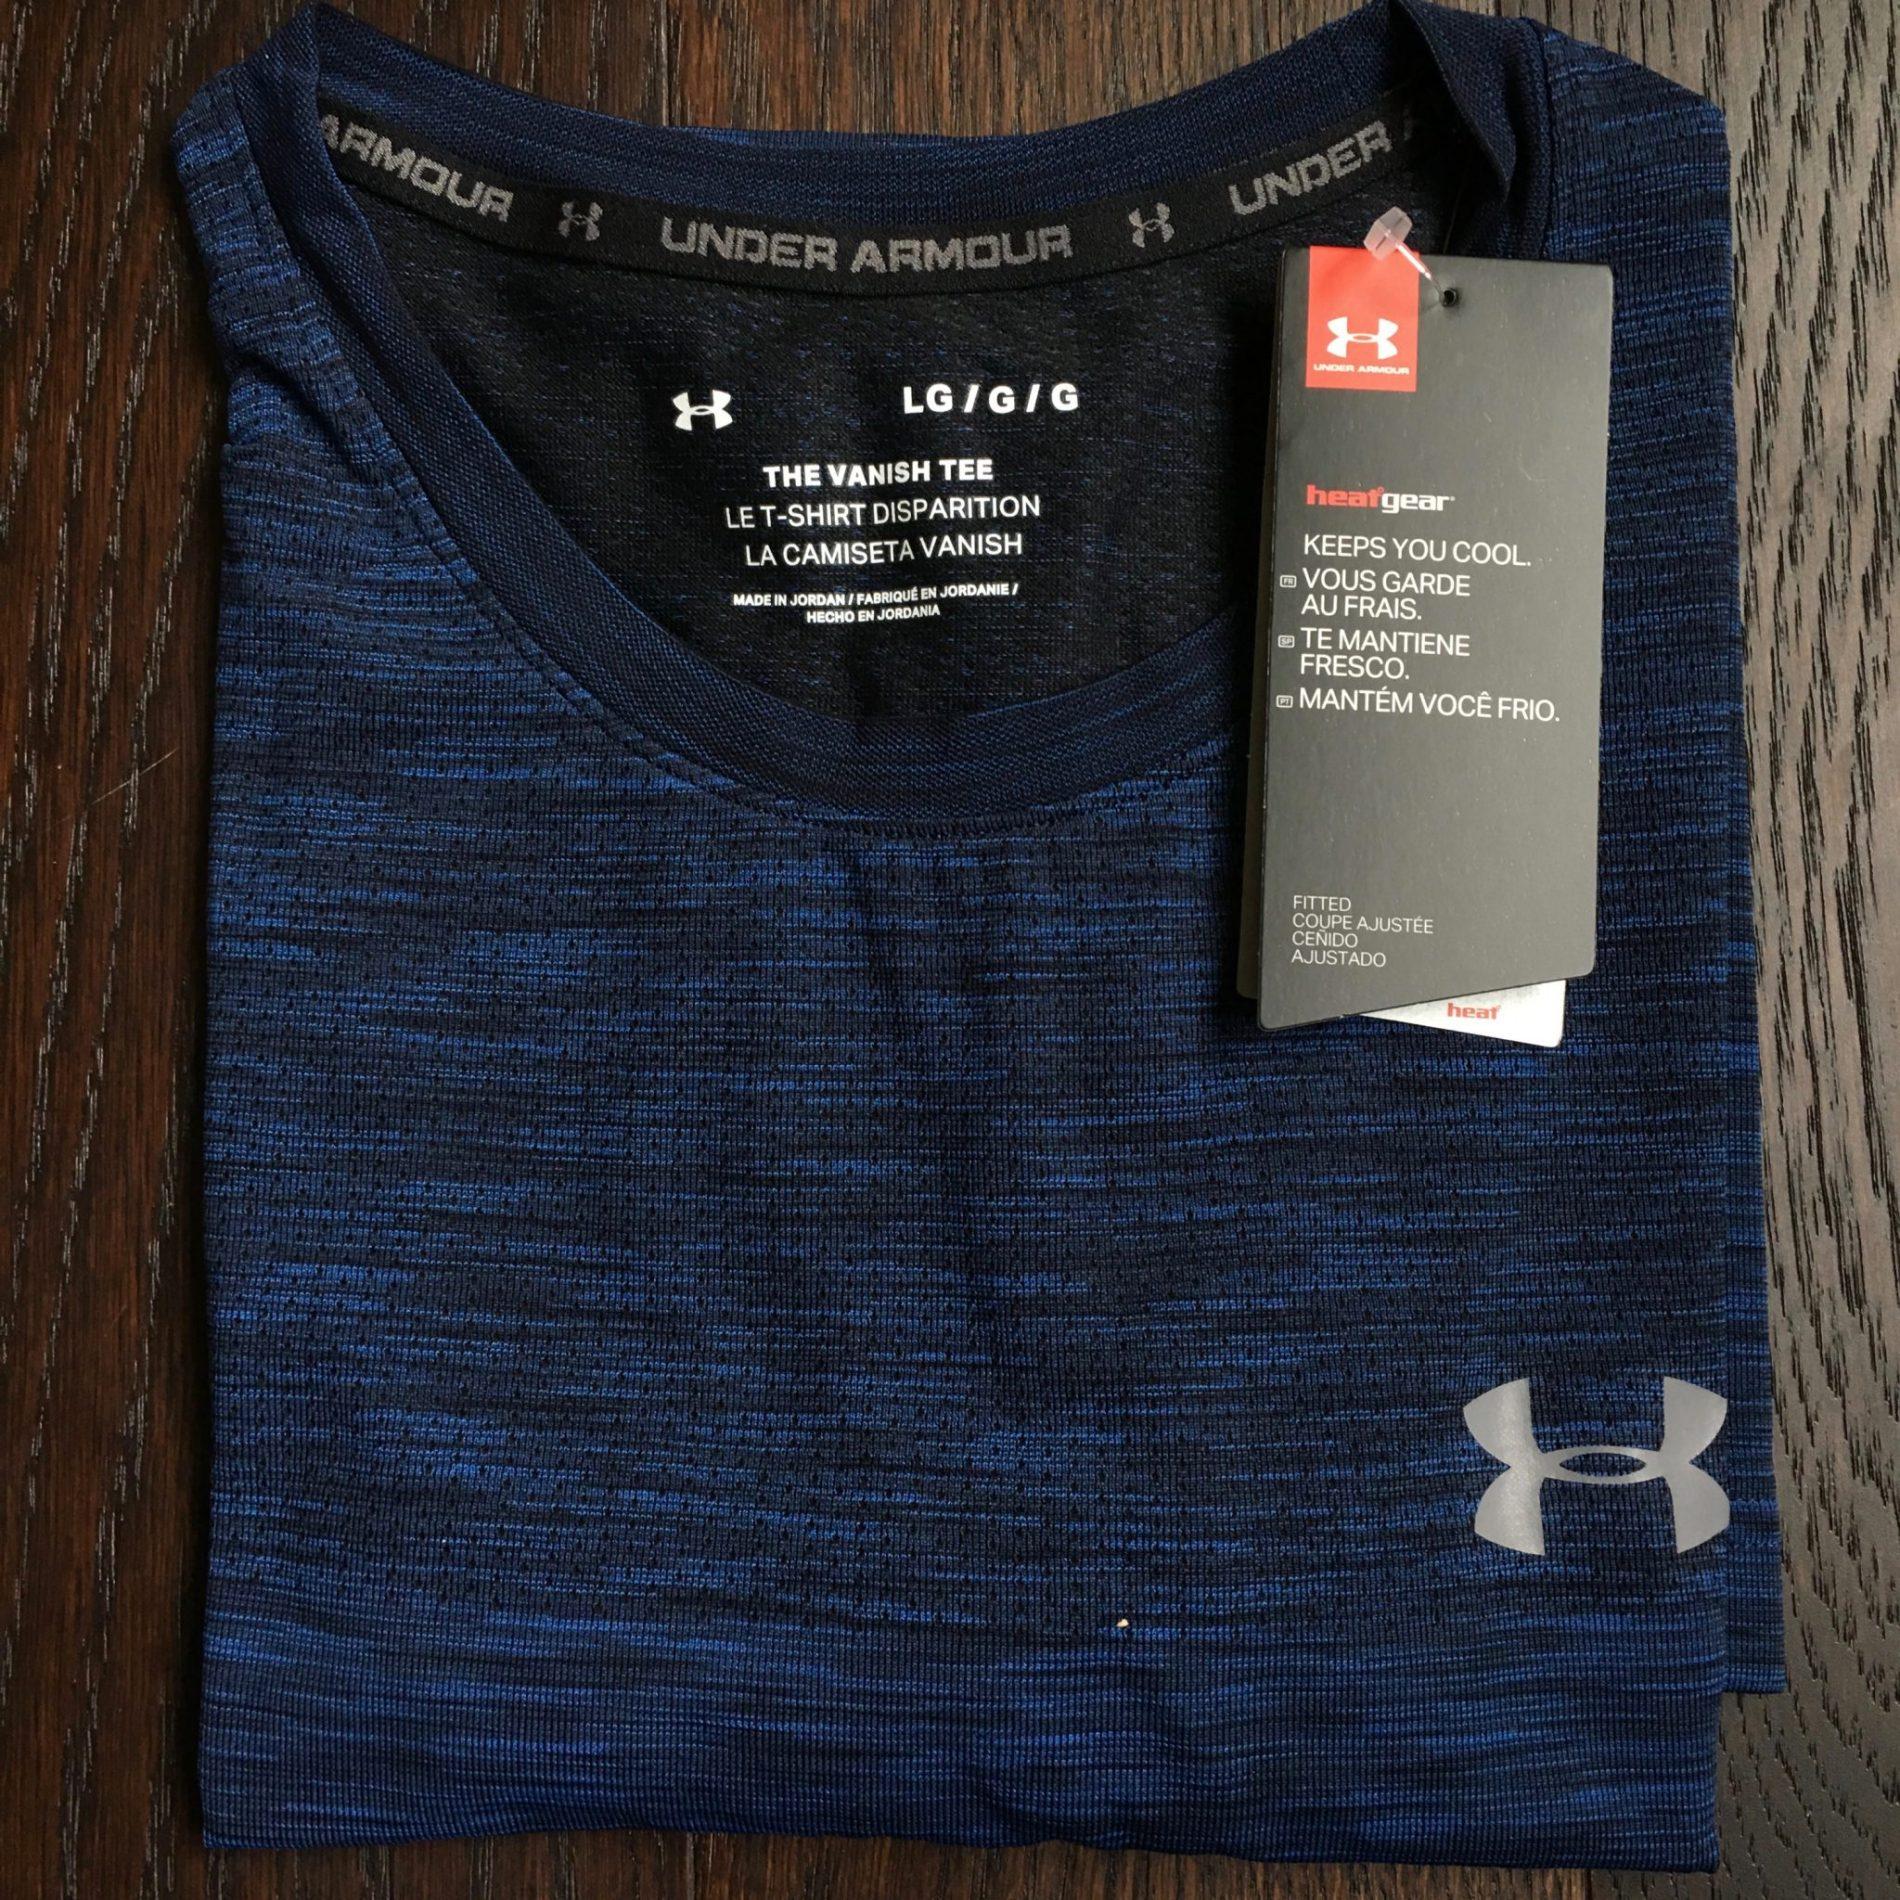 under armour made in